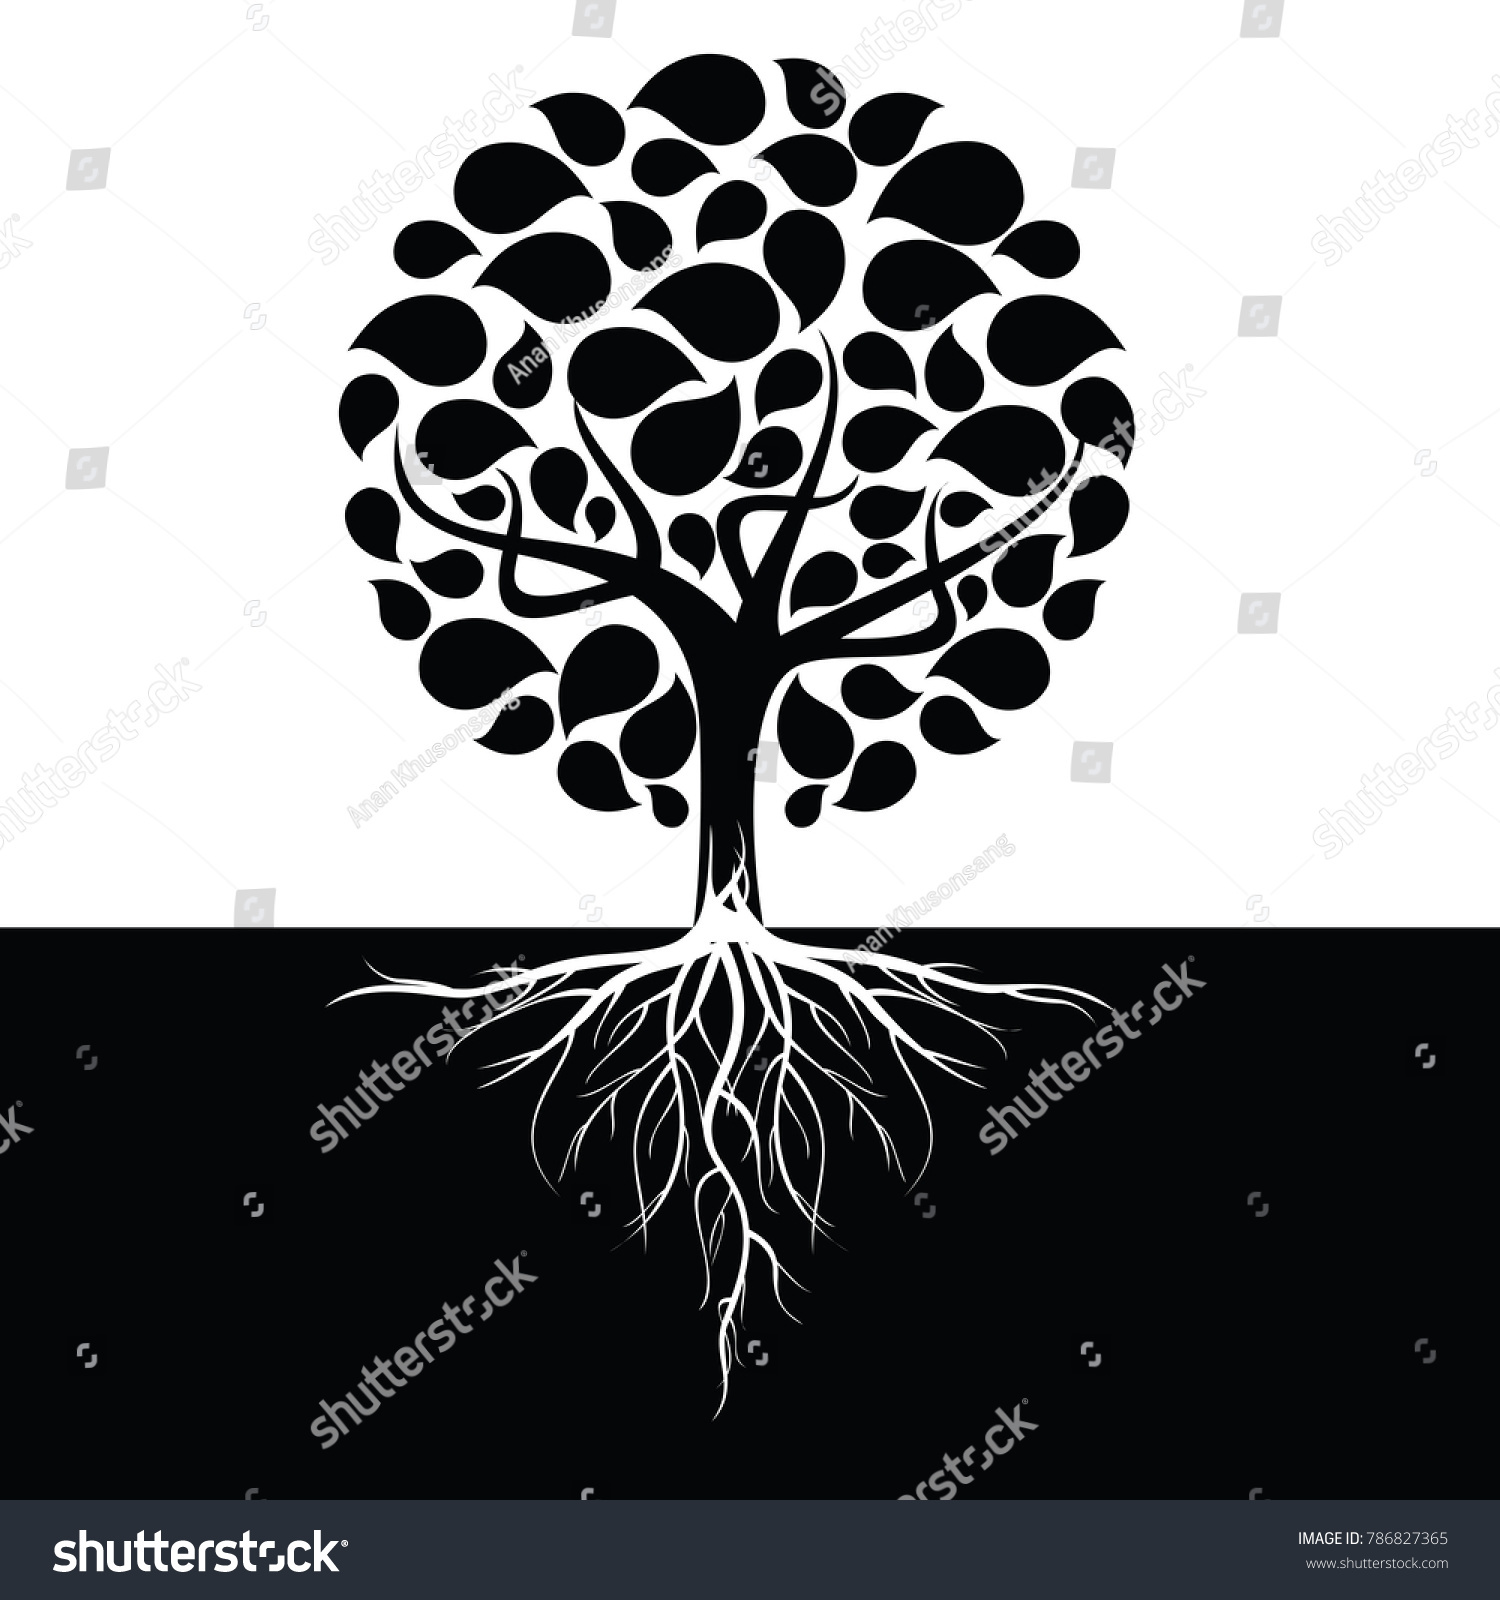 SVG of Black leafy tree with roots With trees isolated from white background. svg